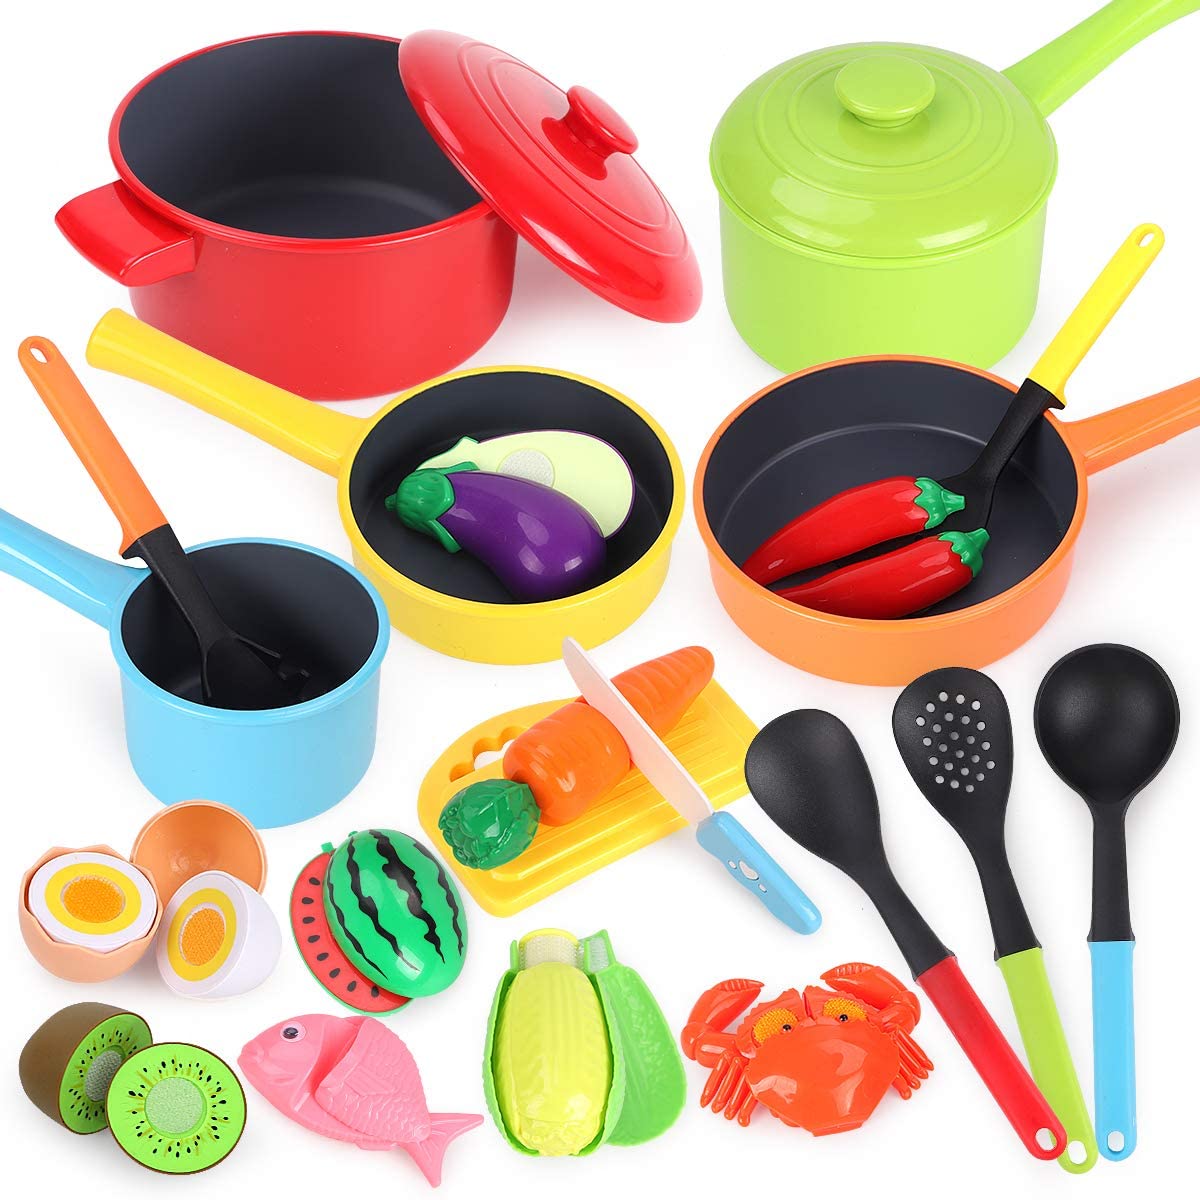 Kitchen Pretend Play Toys Kitchen Cooking Playset for Kids - GILOBABY